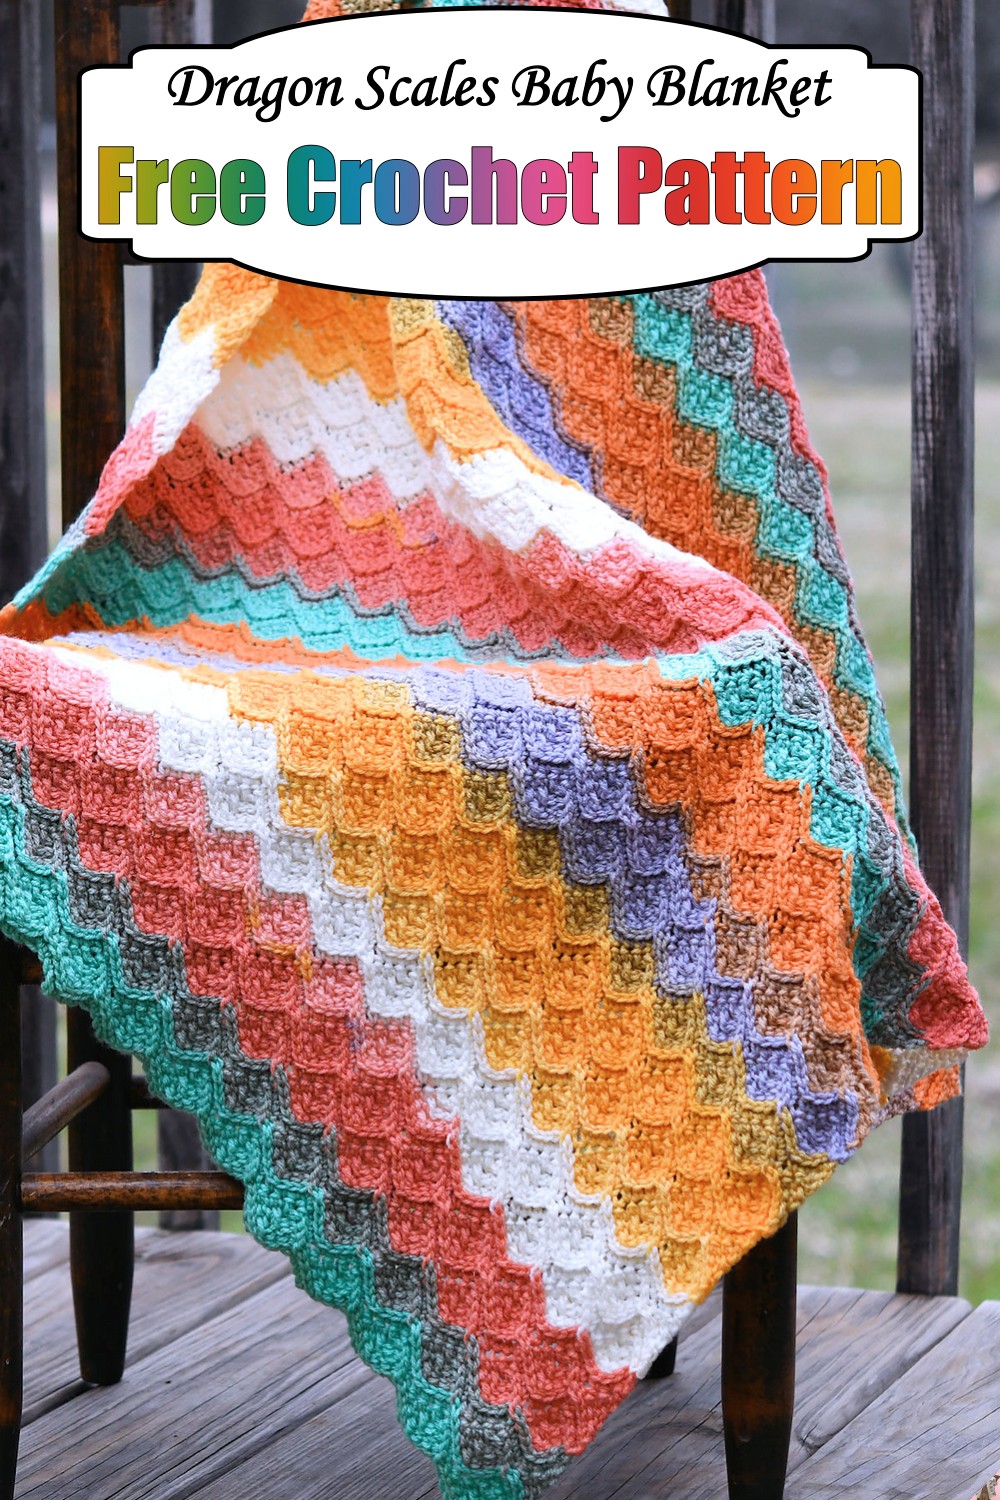 Dragon Scales Baby Blanket